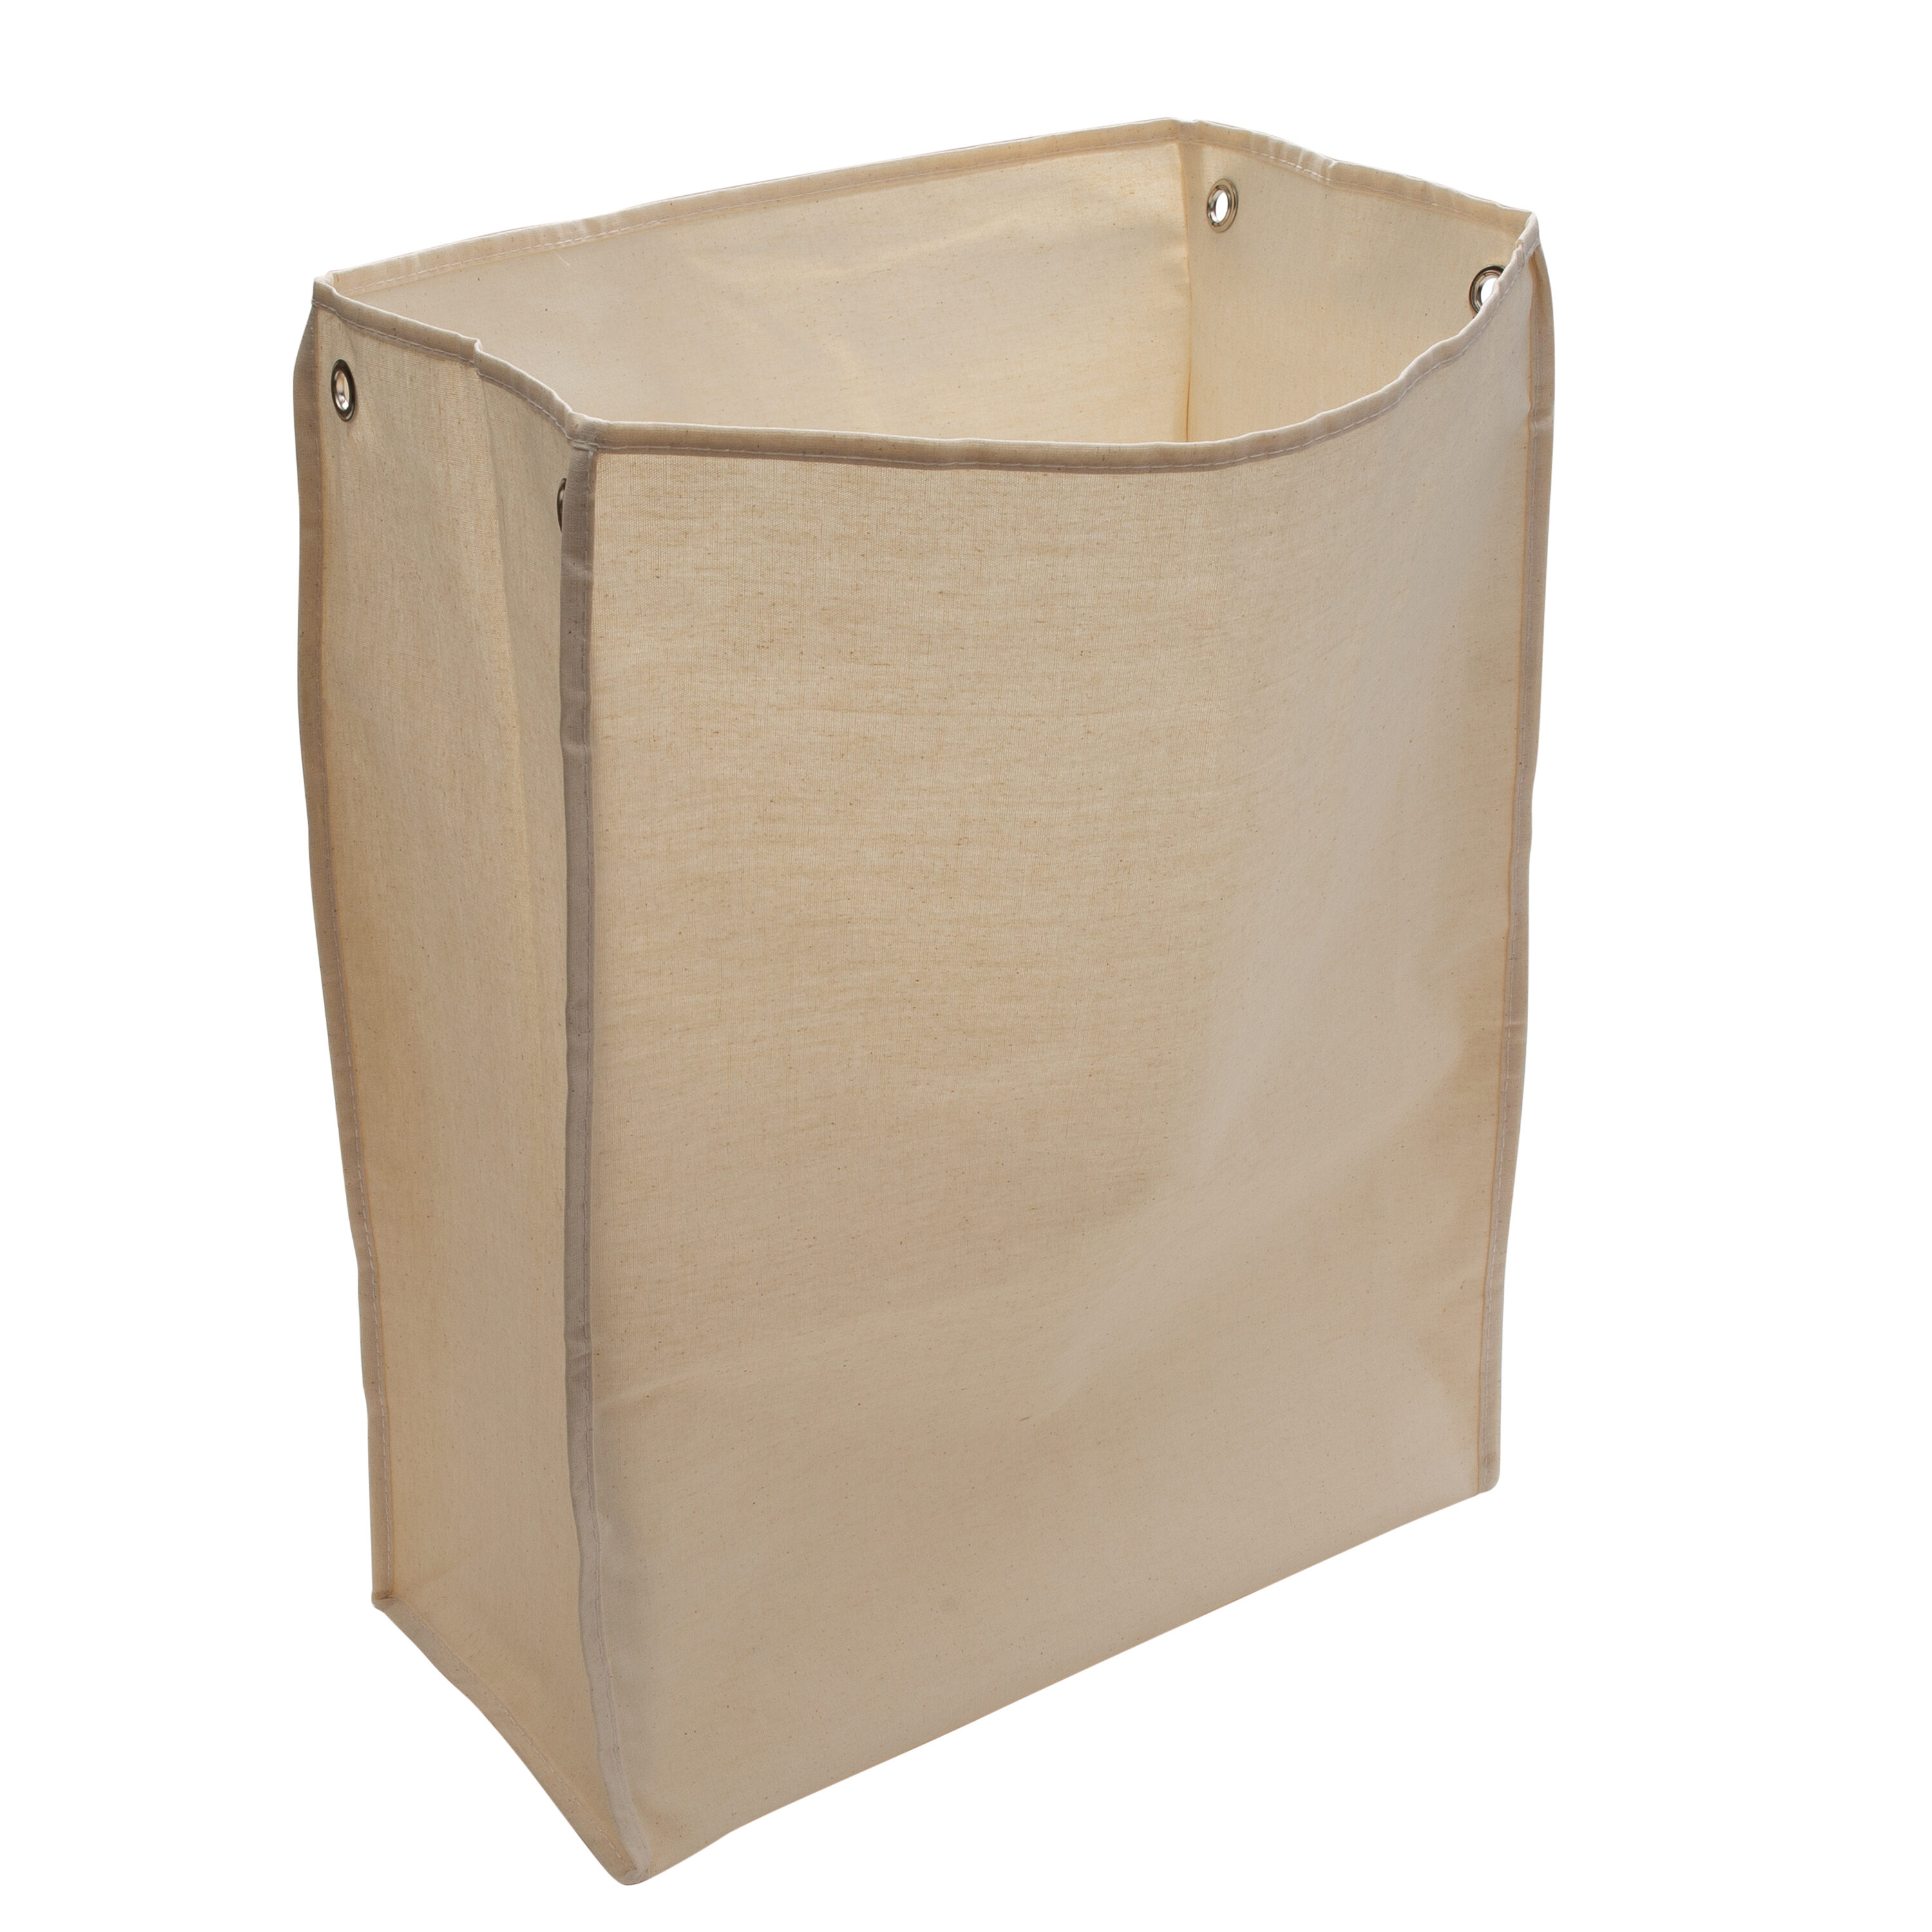 Laundry bag Laundry Hampers & Baskets at